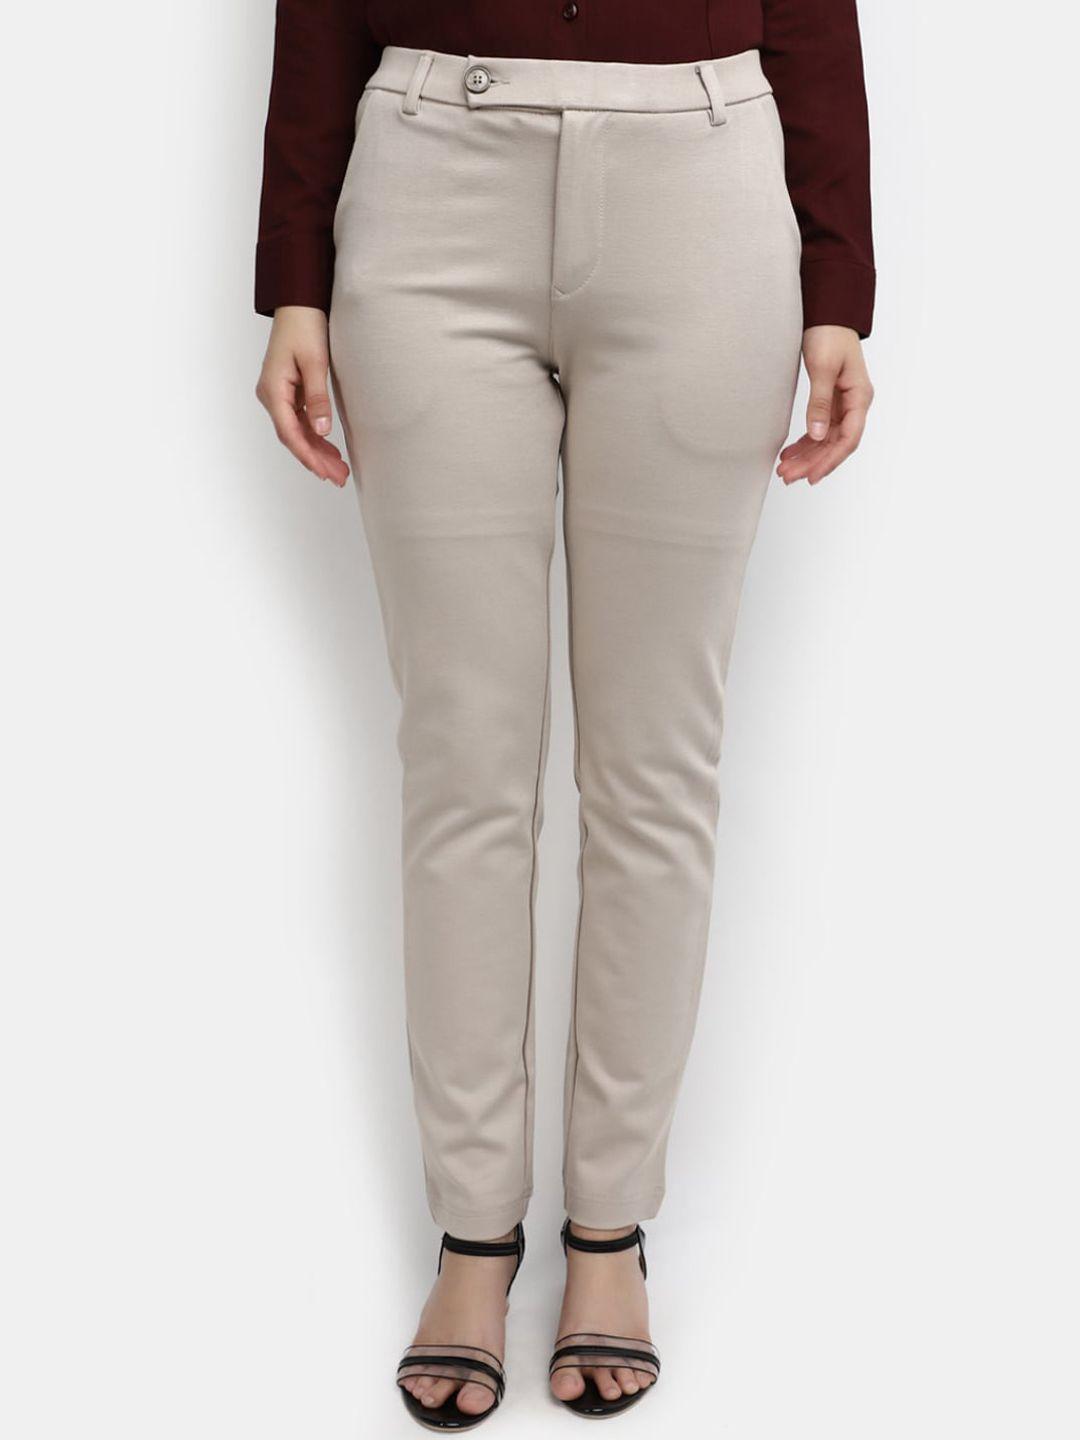 v-mart-women-clean-look-mid-rise-cotton-formal-trousers